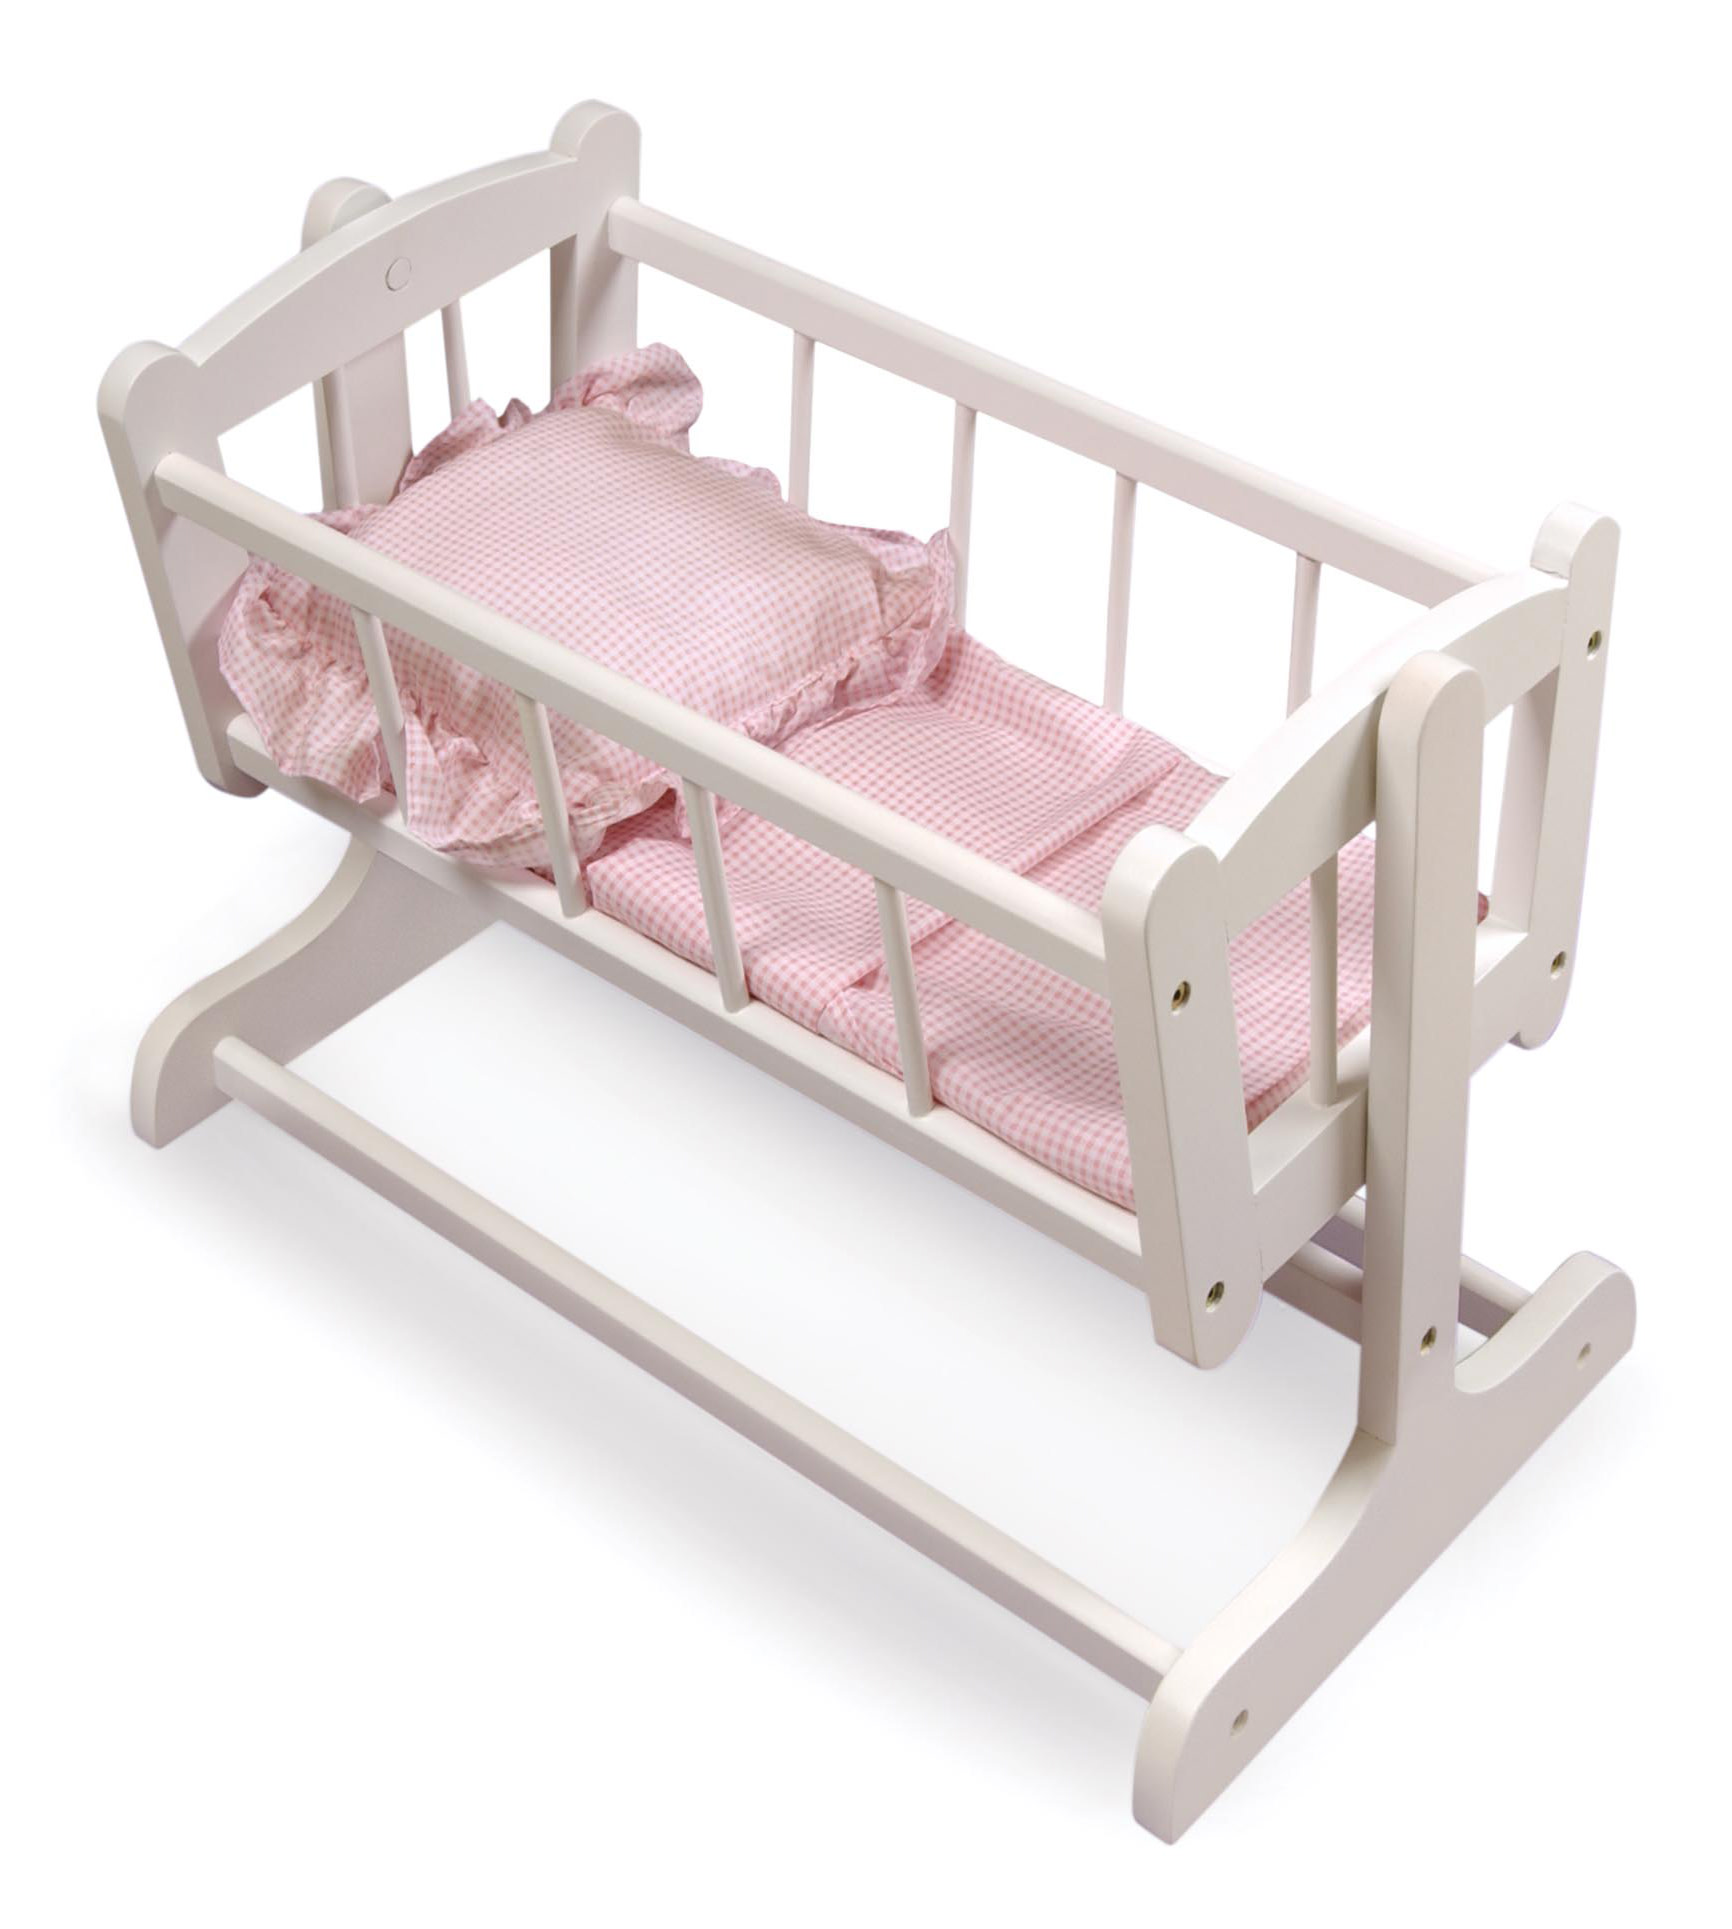 Badger Basket Heirloom Style Doll Cradle with Bedding - White/Pink - image 1 of 8